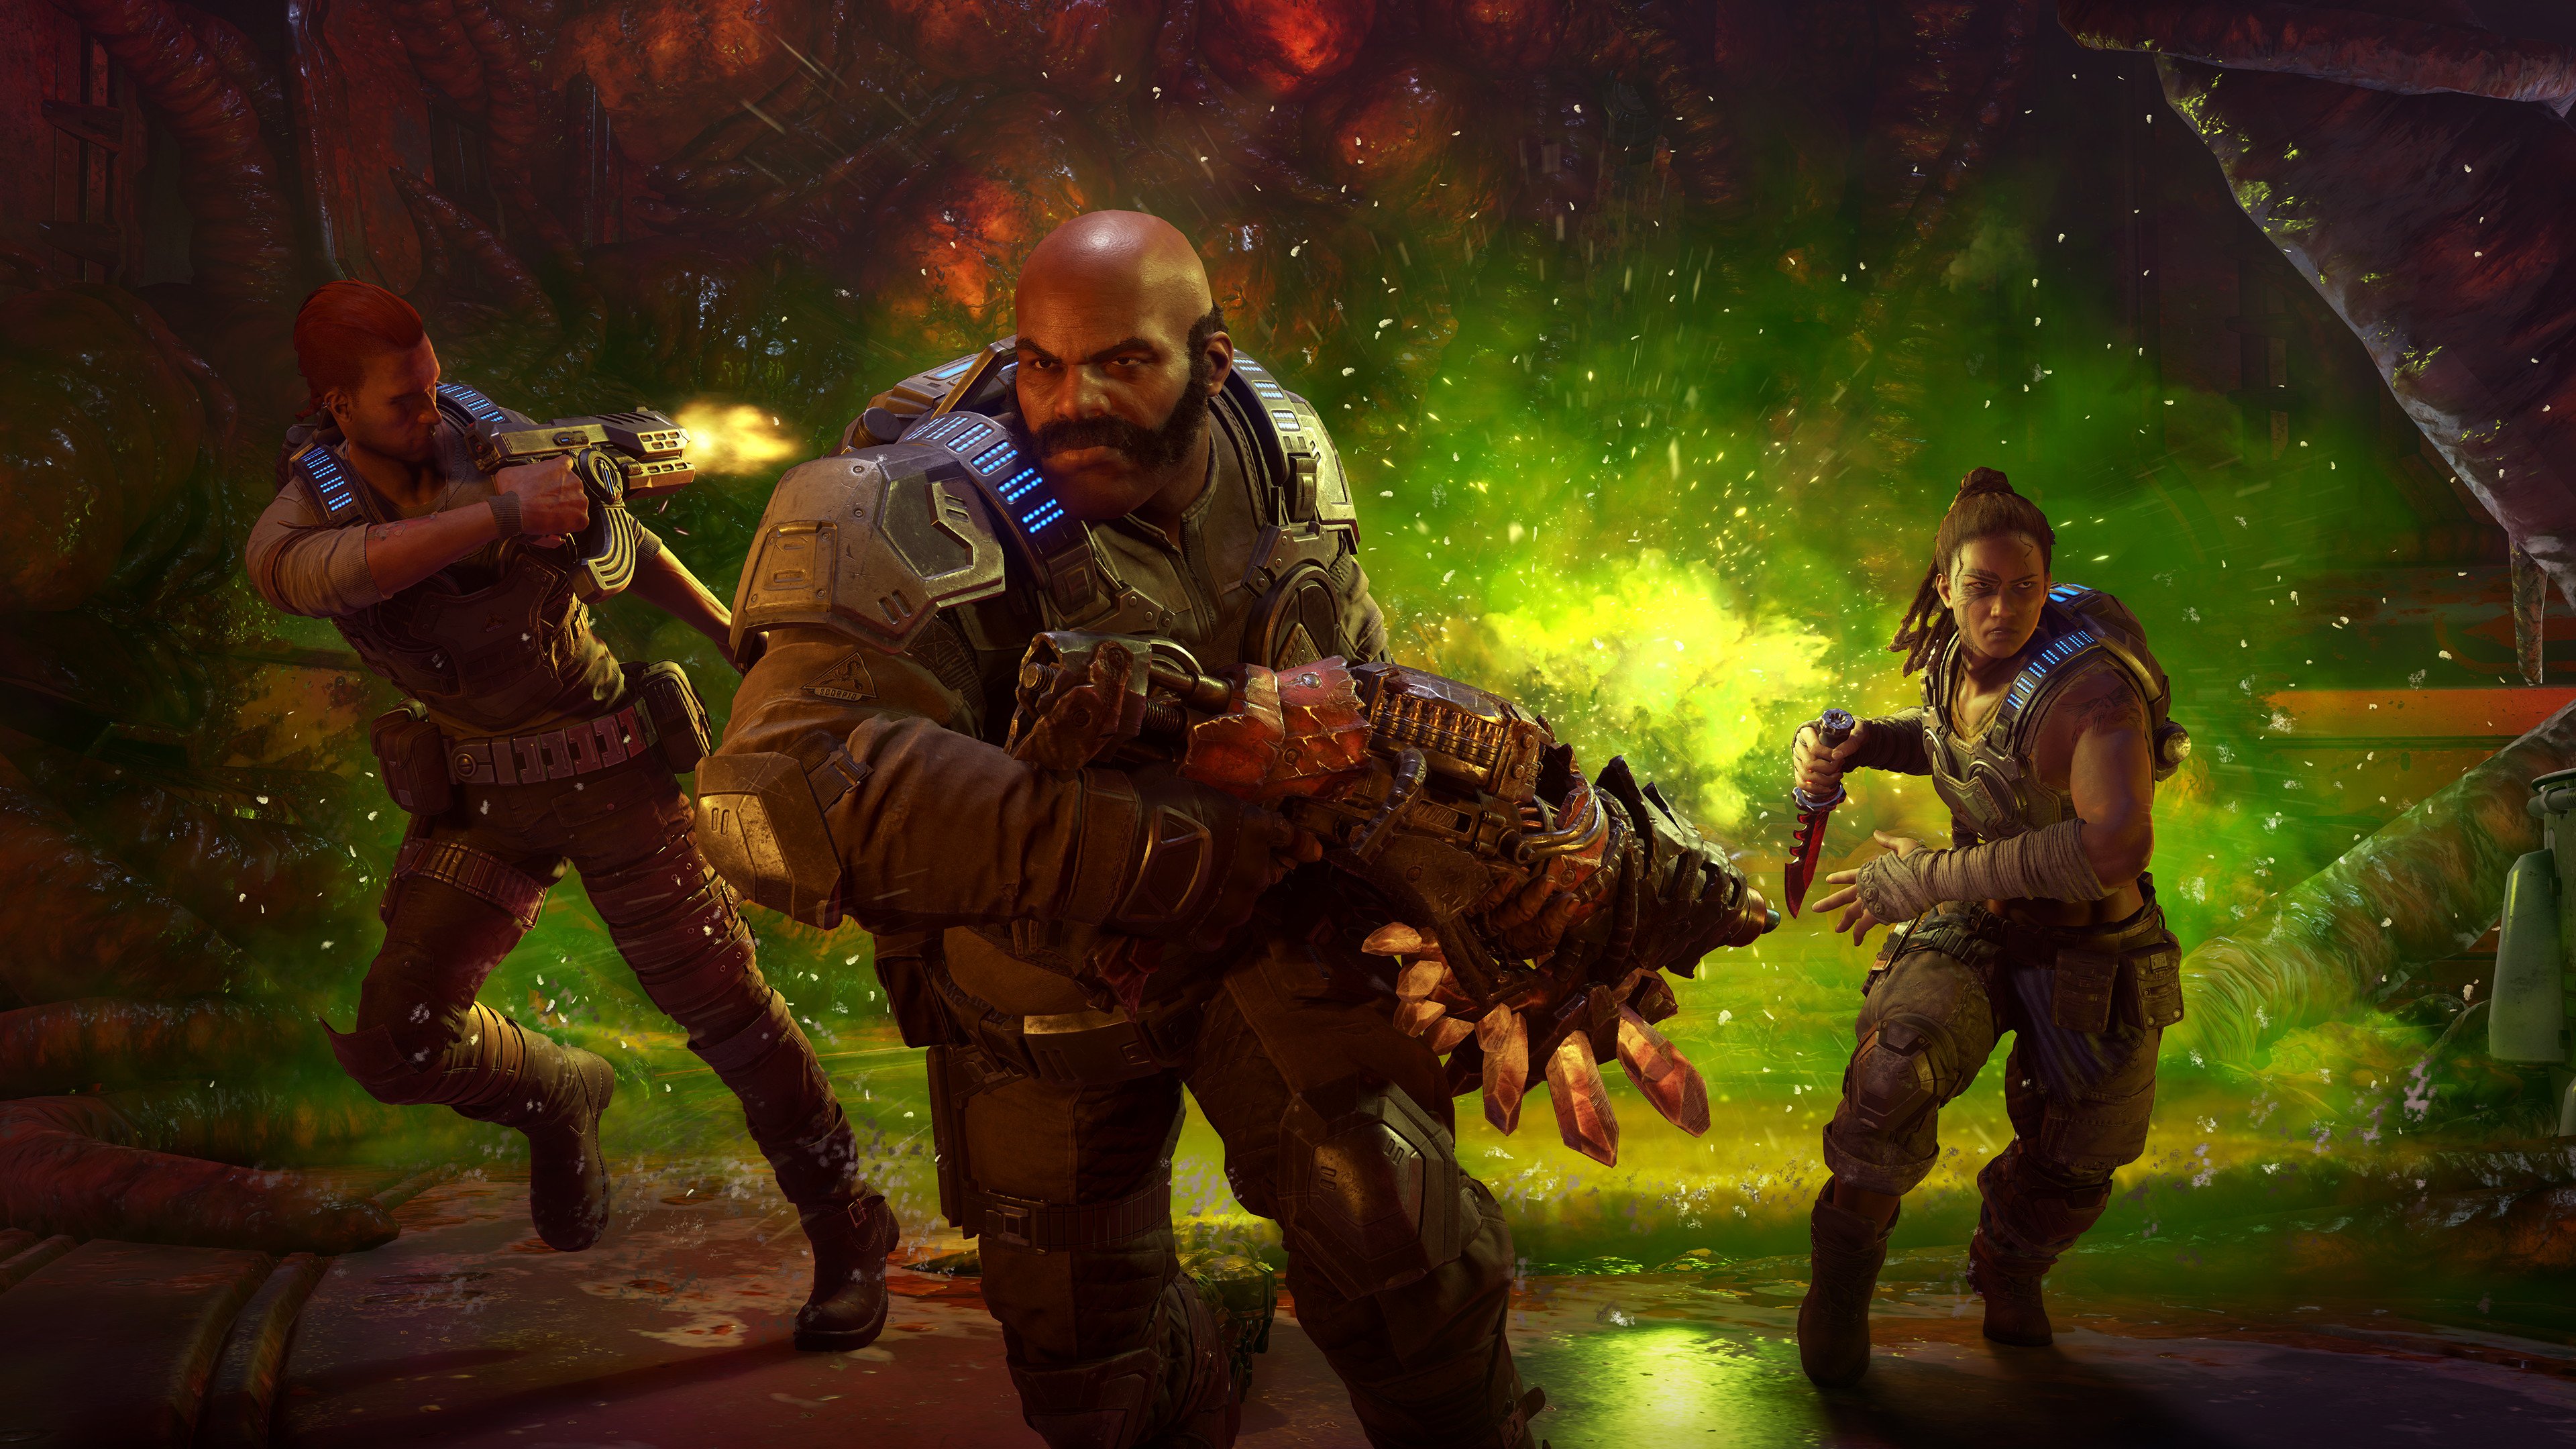 Gears 5 Relaunches on Xbox Series XS and Drops Bombs with WWE's Batista as  Marcus - Xbox Wire